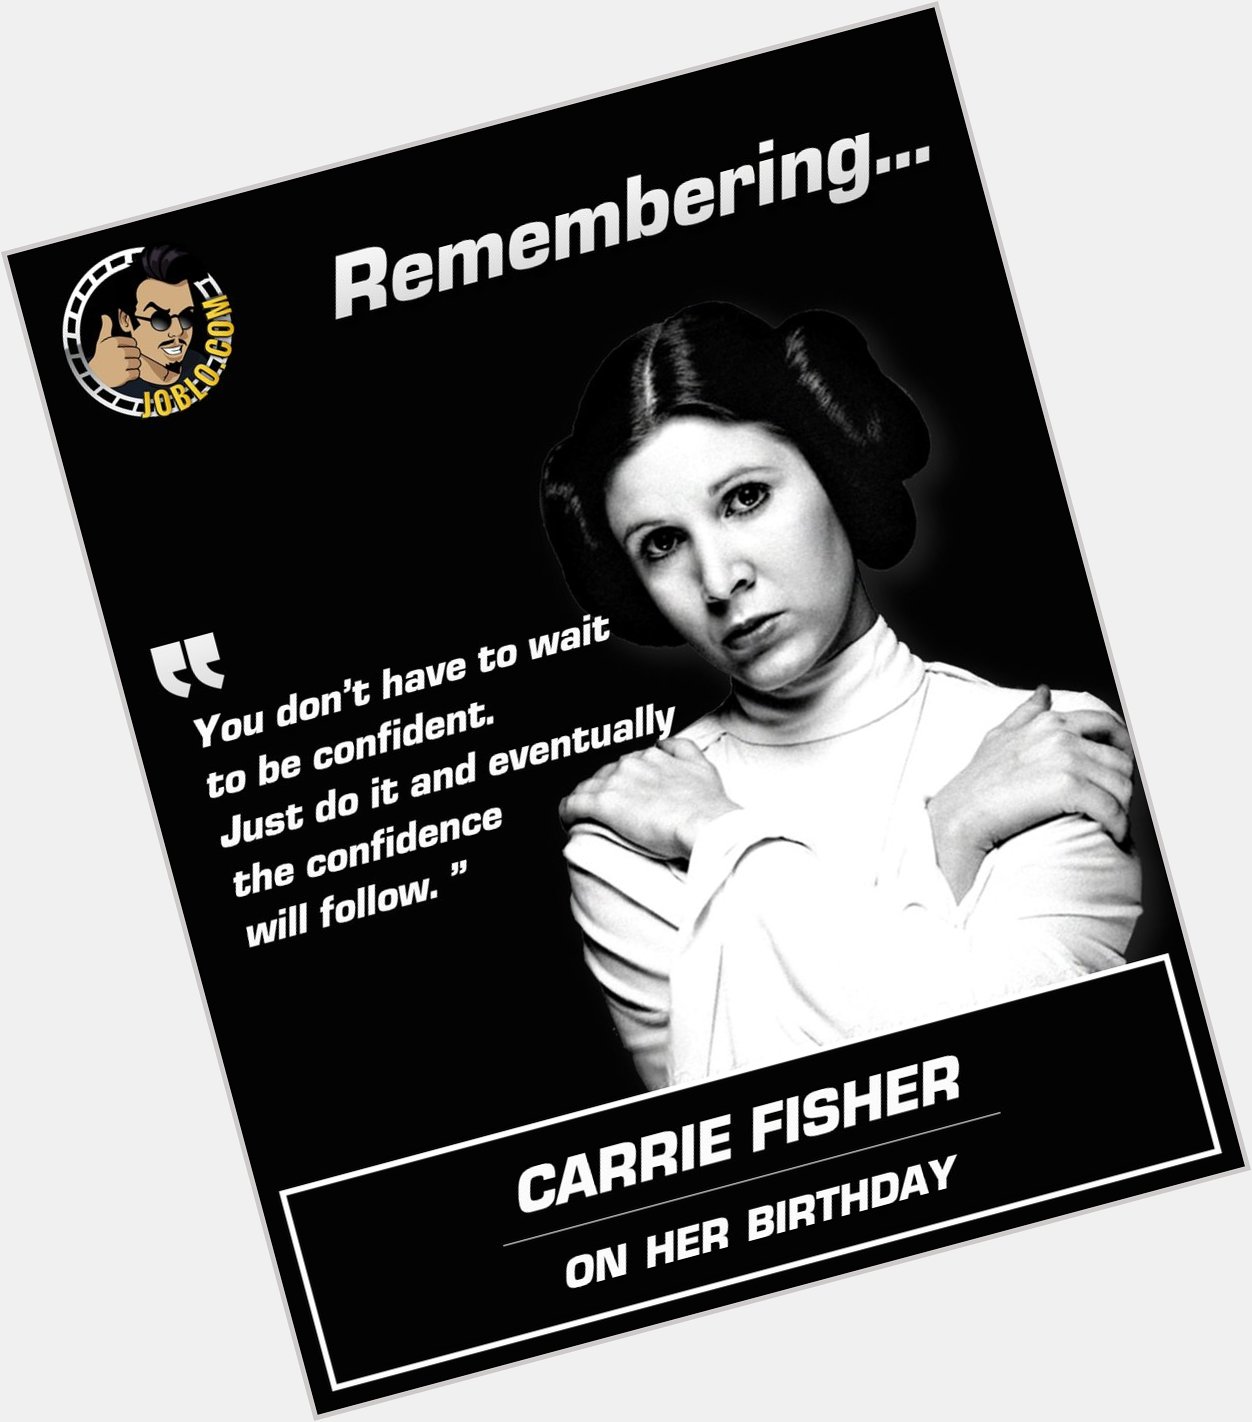 Today we remember Carrie Fisher.

Happy birthday, princess! RIP. 